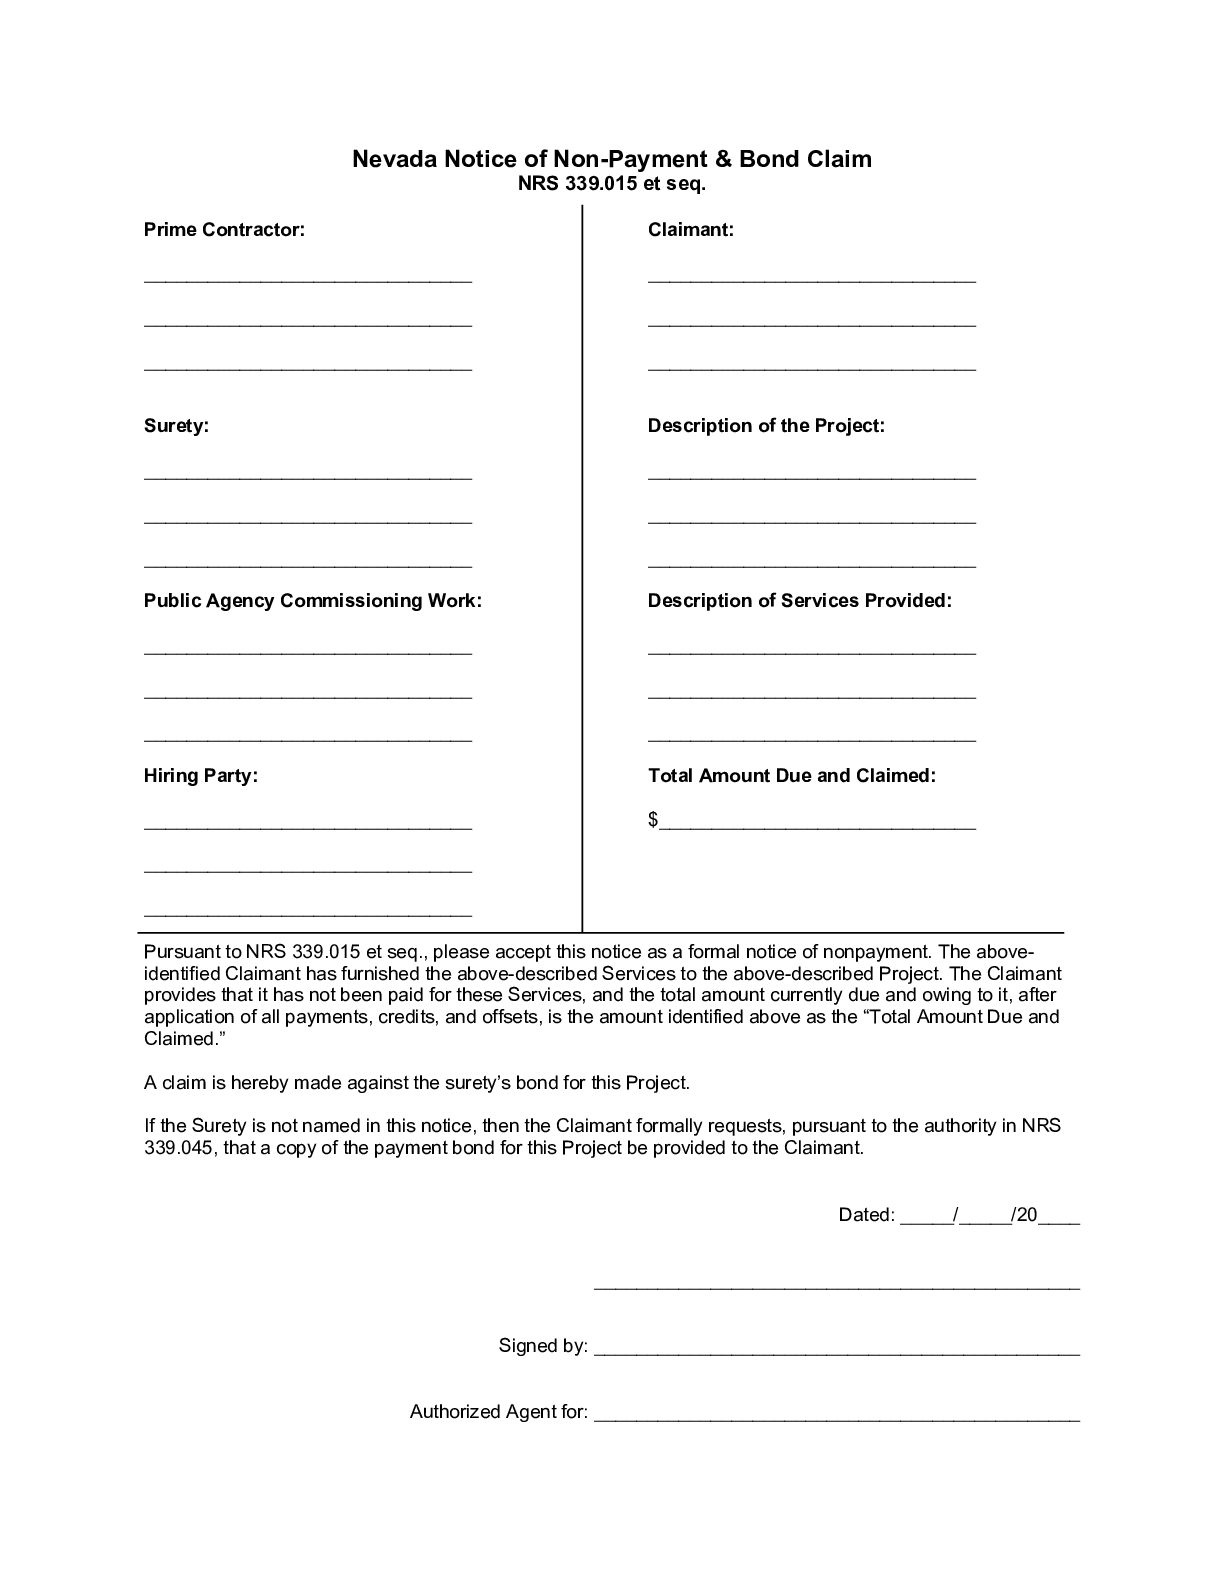 Nevada Bond Claim Form | Free Download - free from